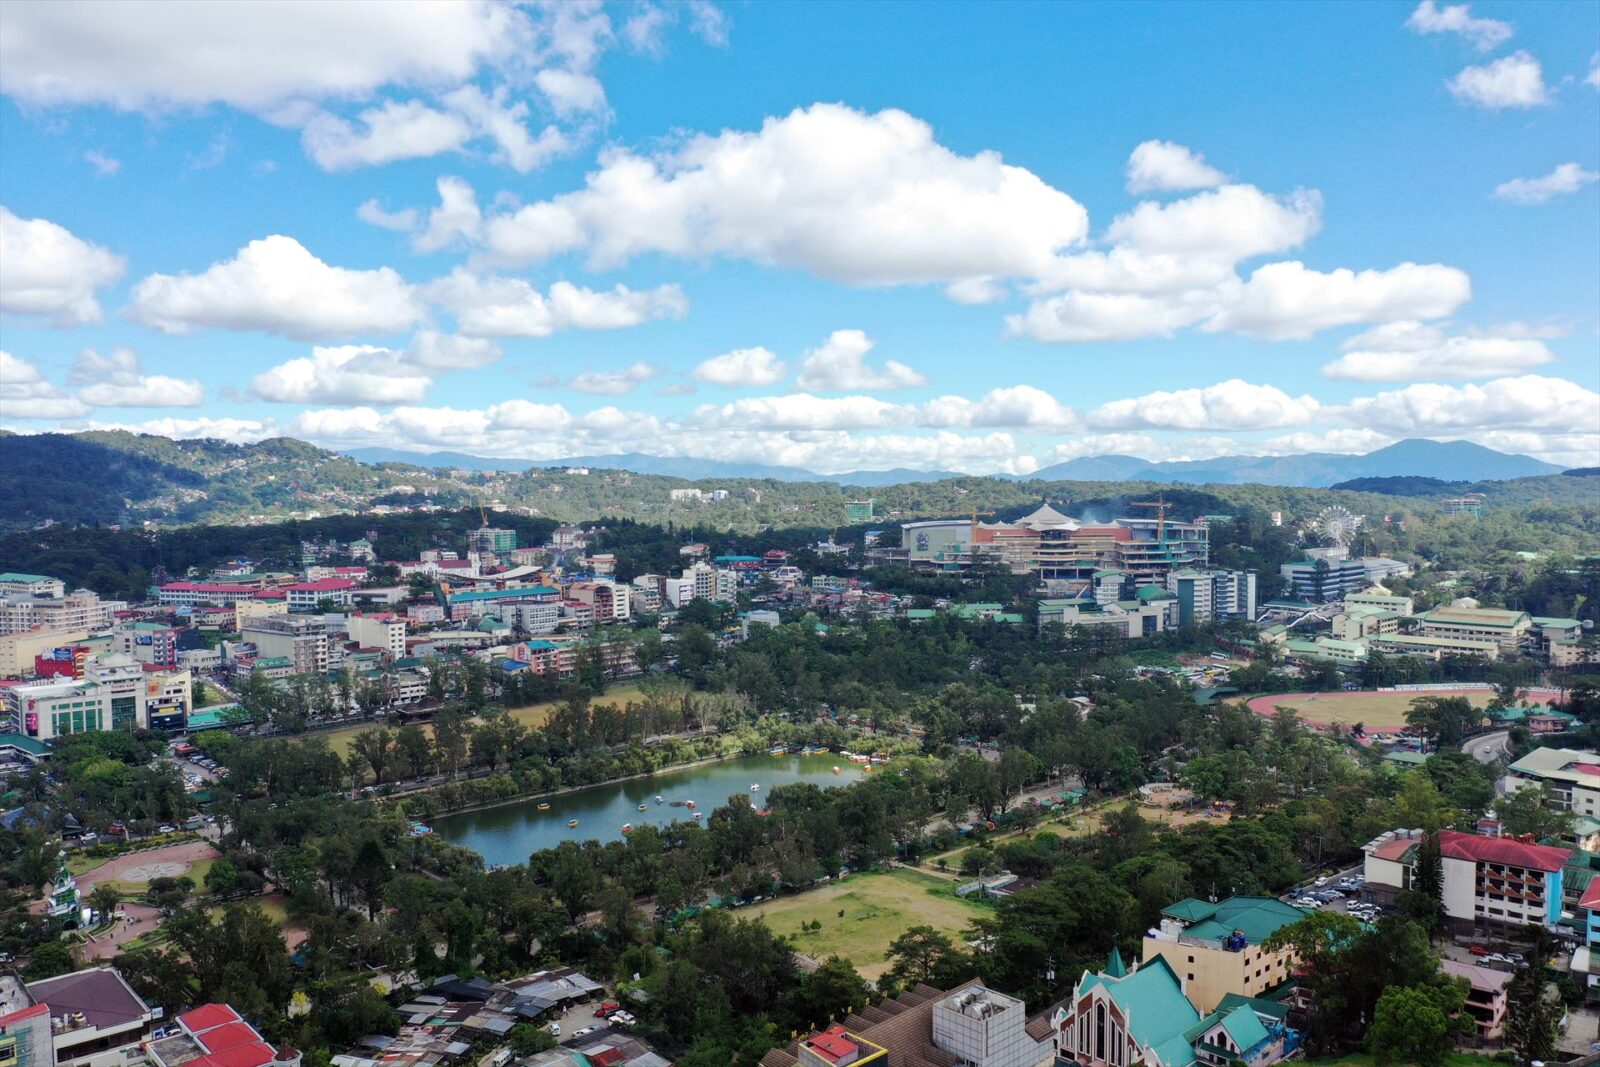 Baguio overview